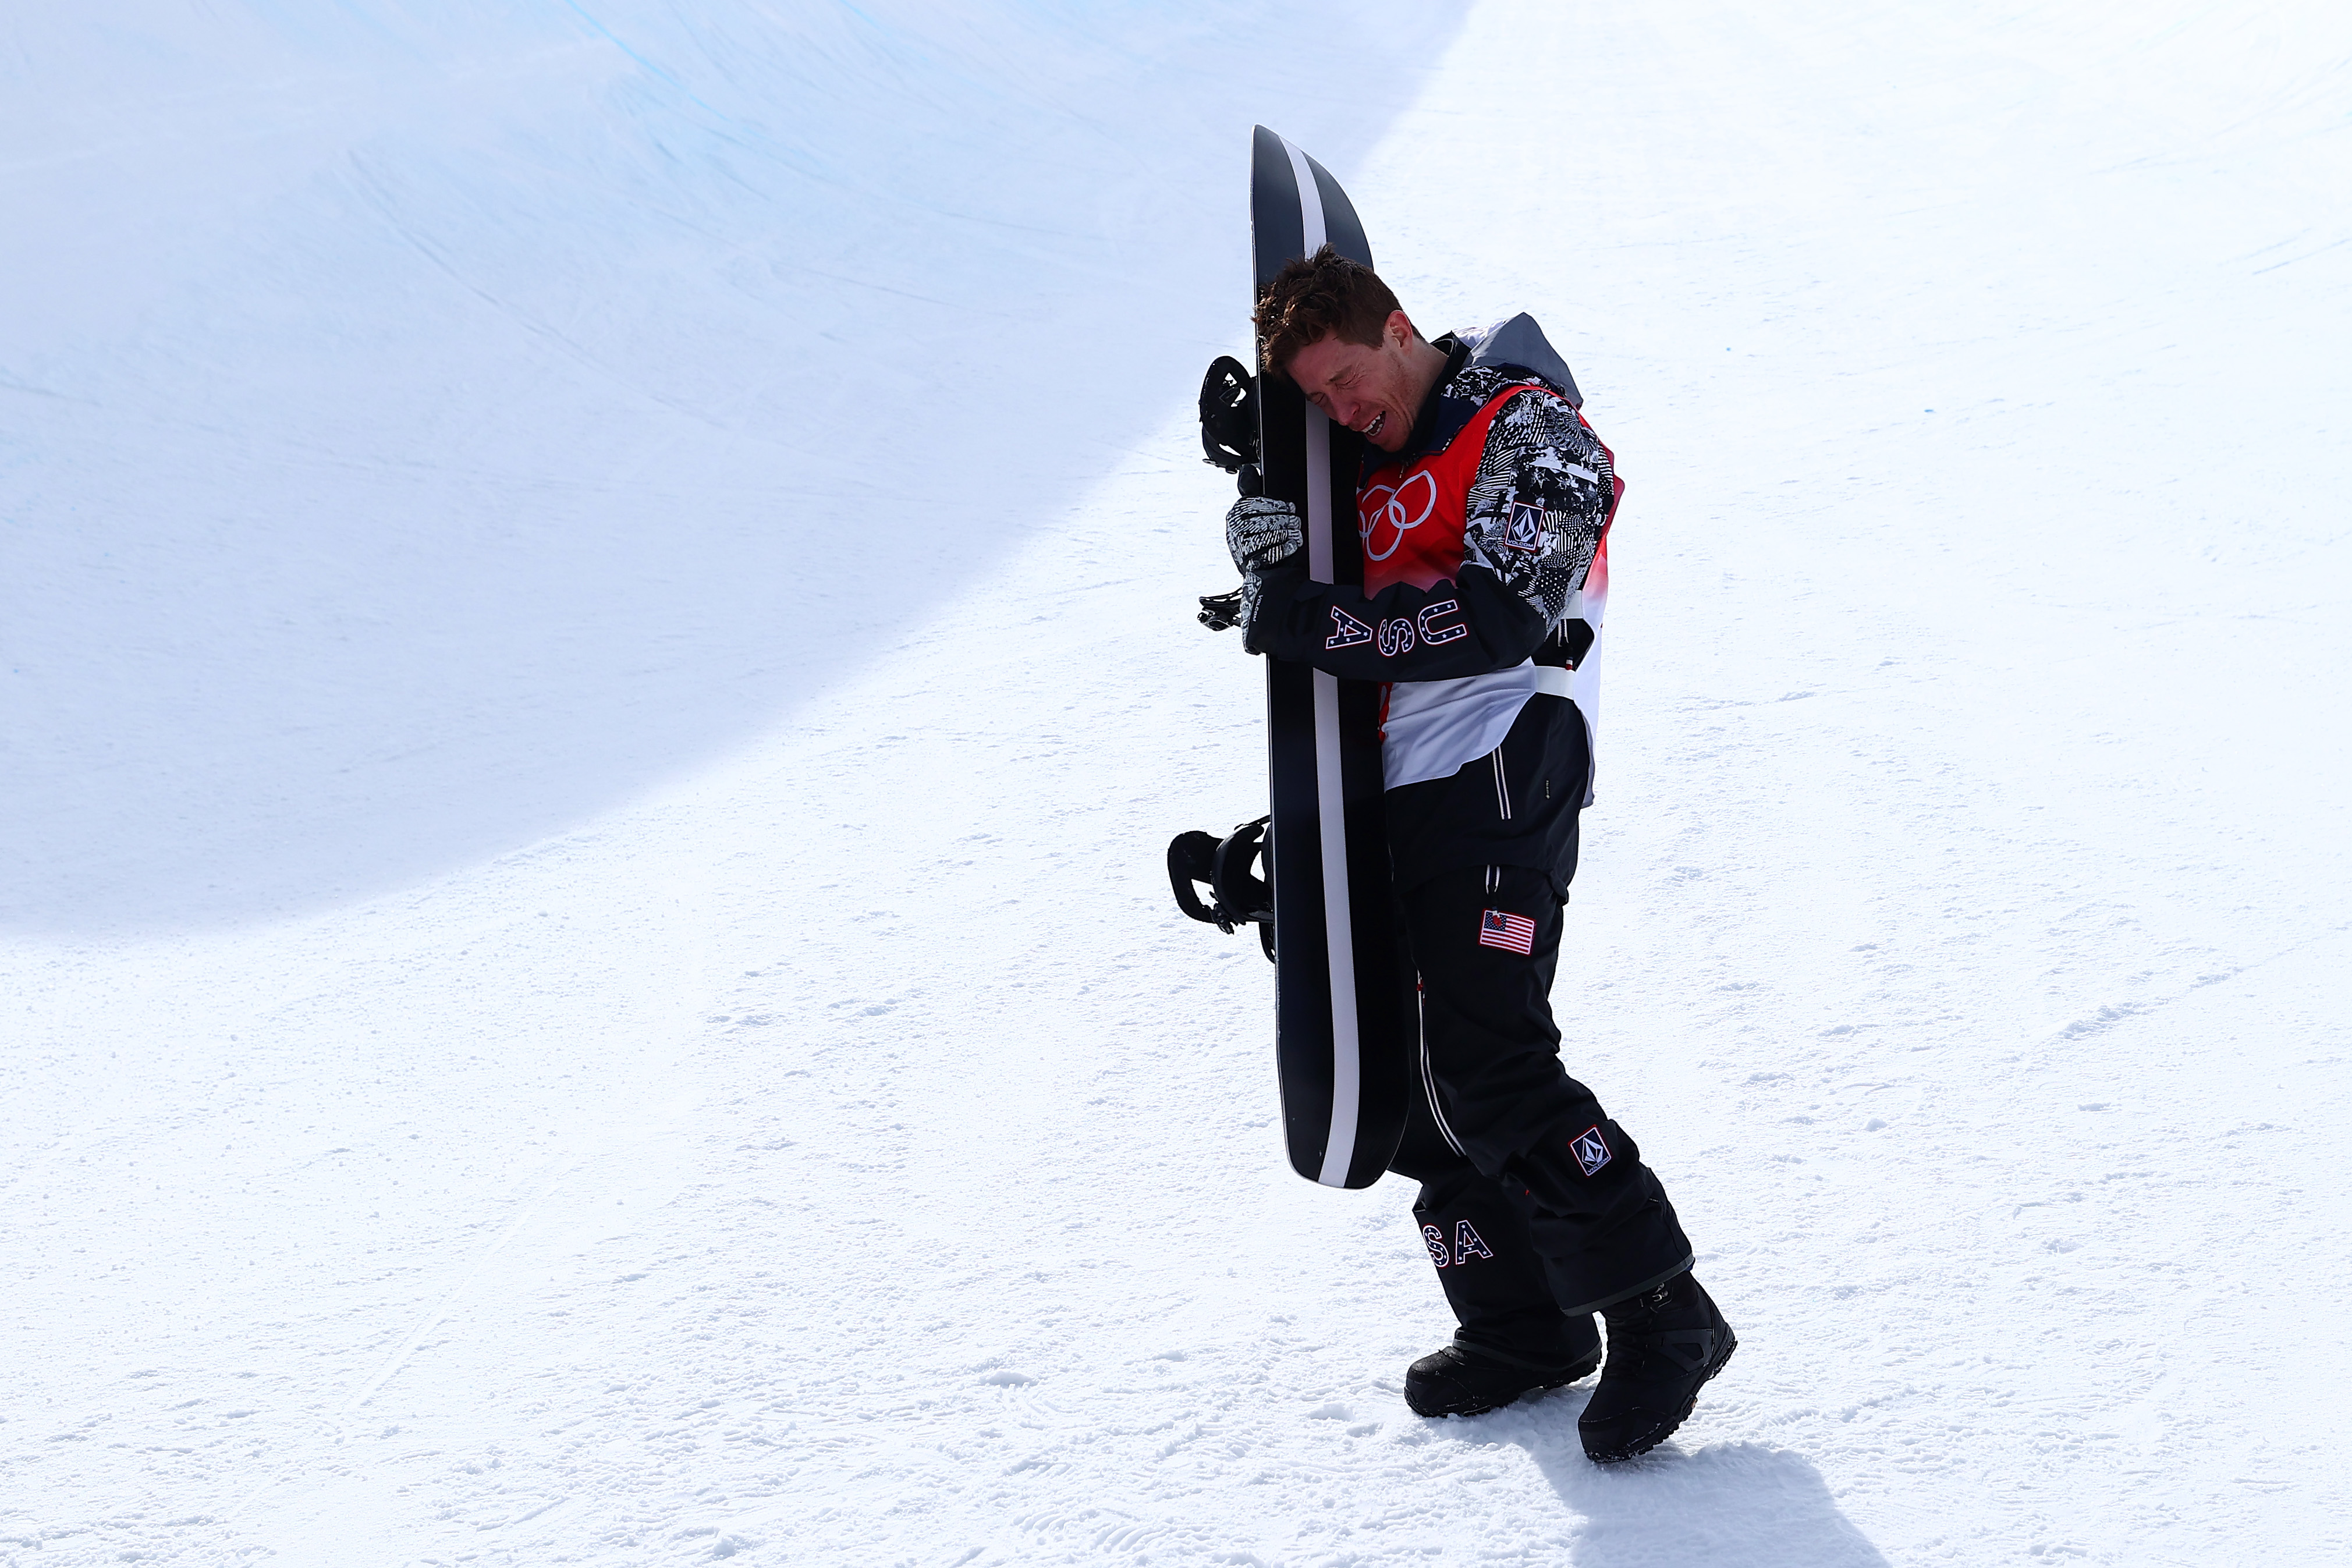 Shaun White rallies to side of physical therapist with cancer